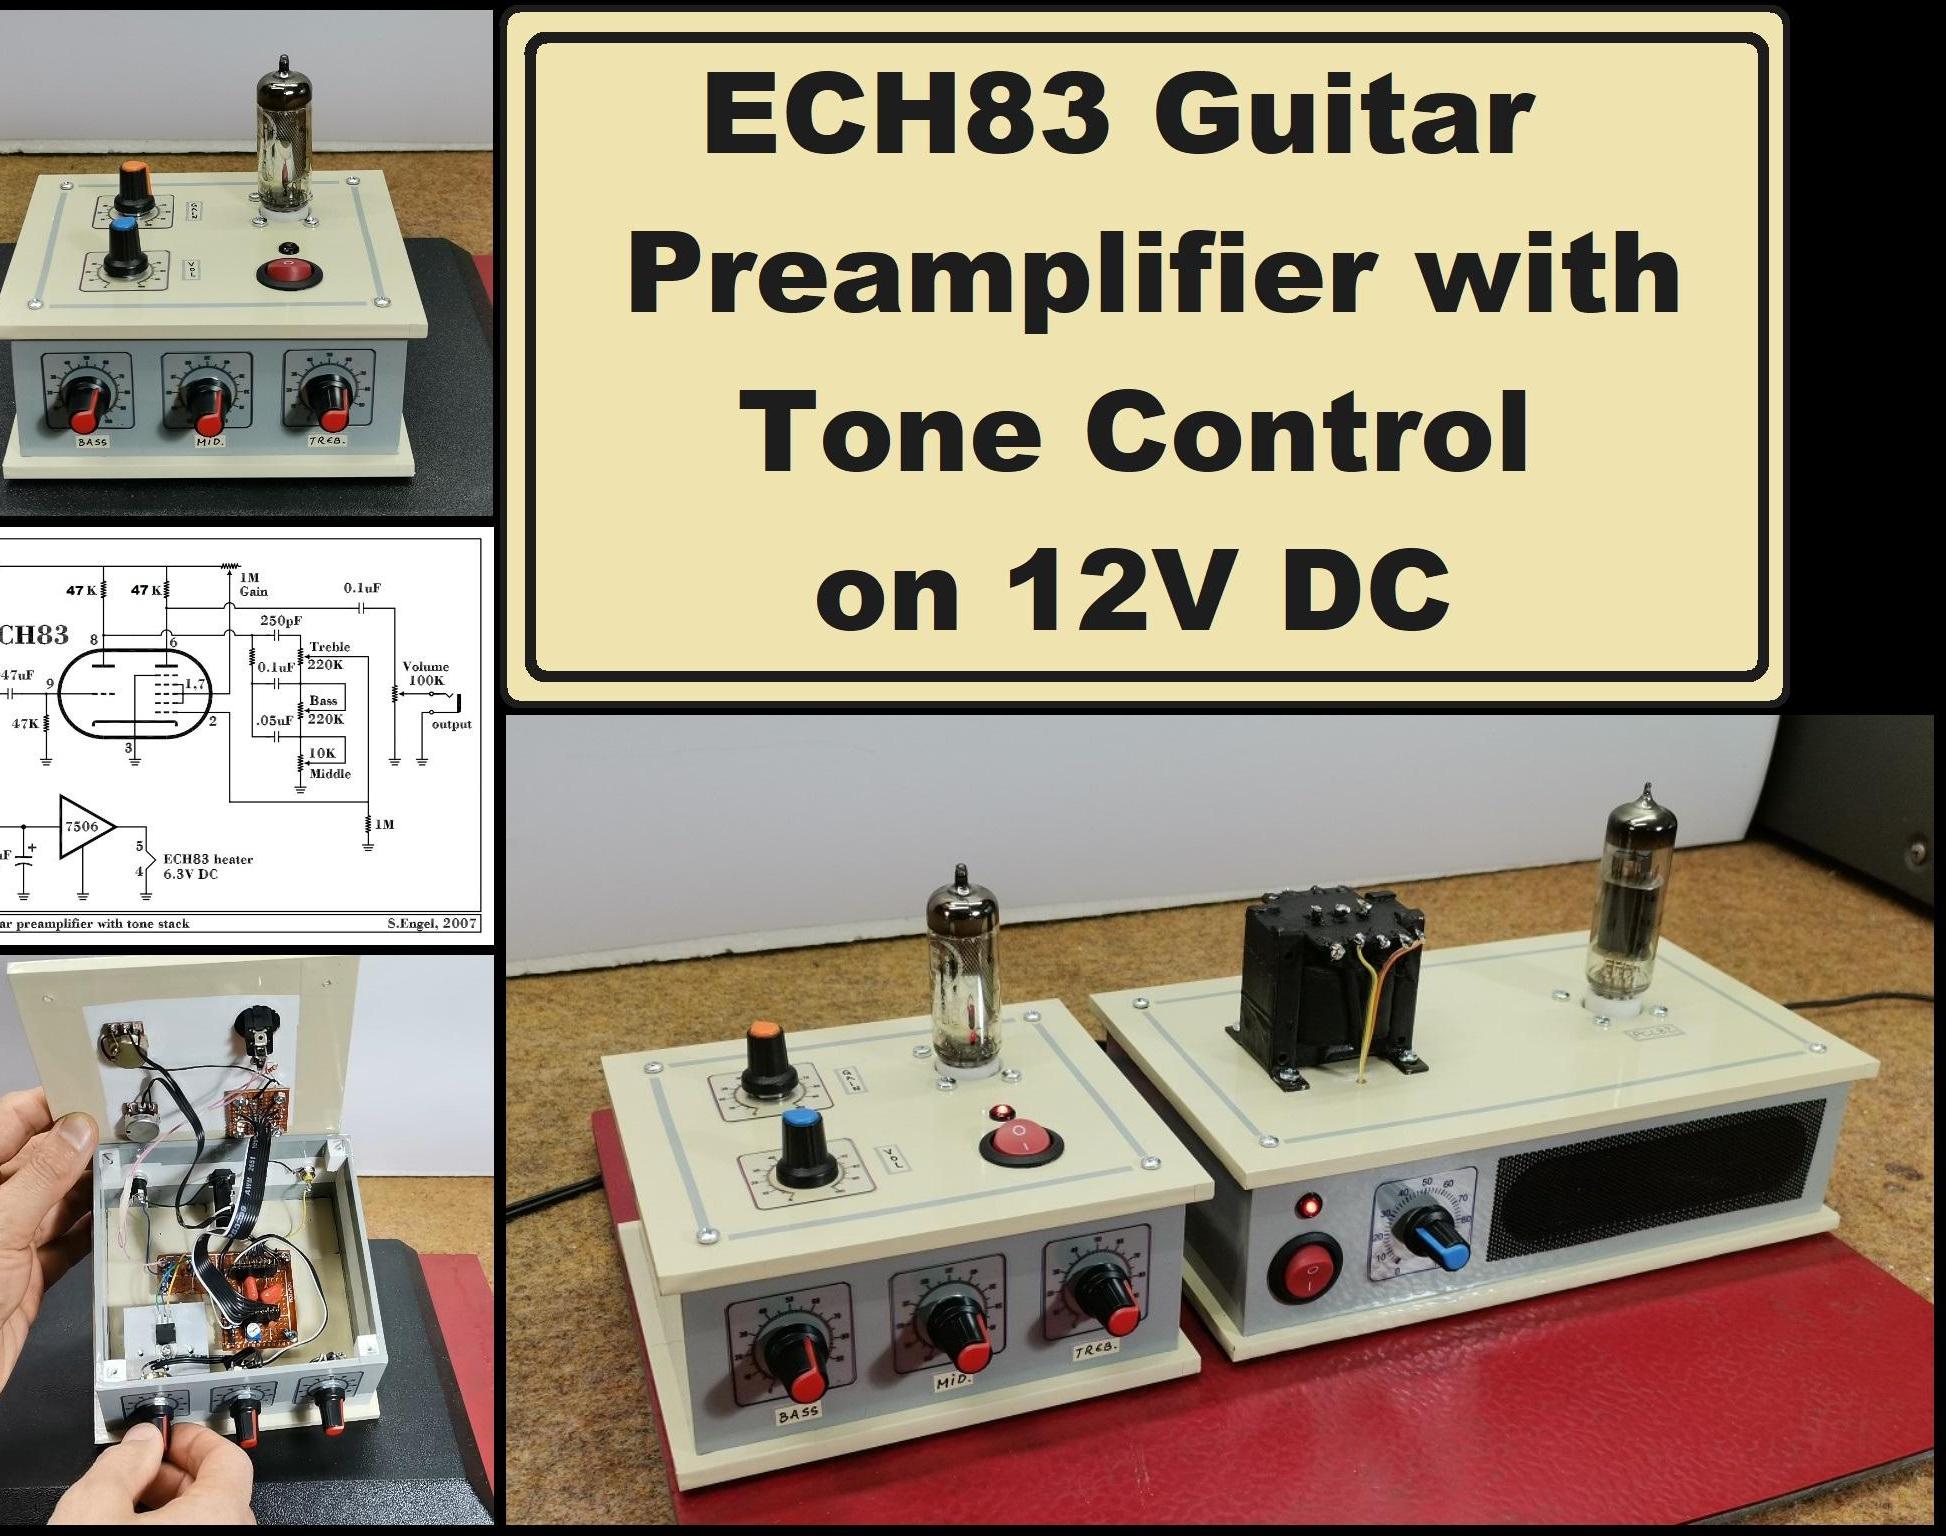 ECH83 Guitar Preamplifier With Tone Control on 12V DC